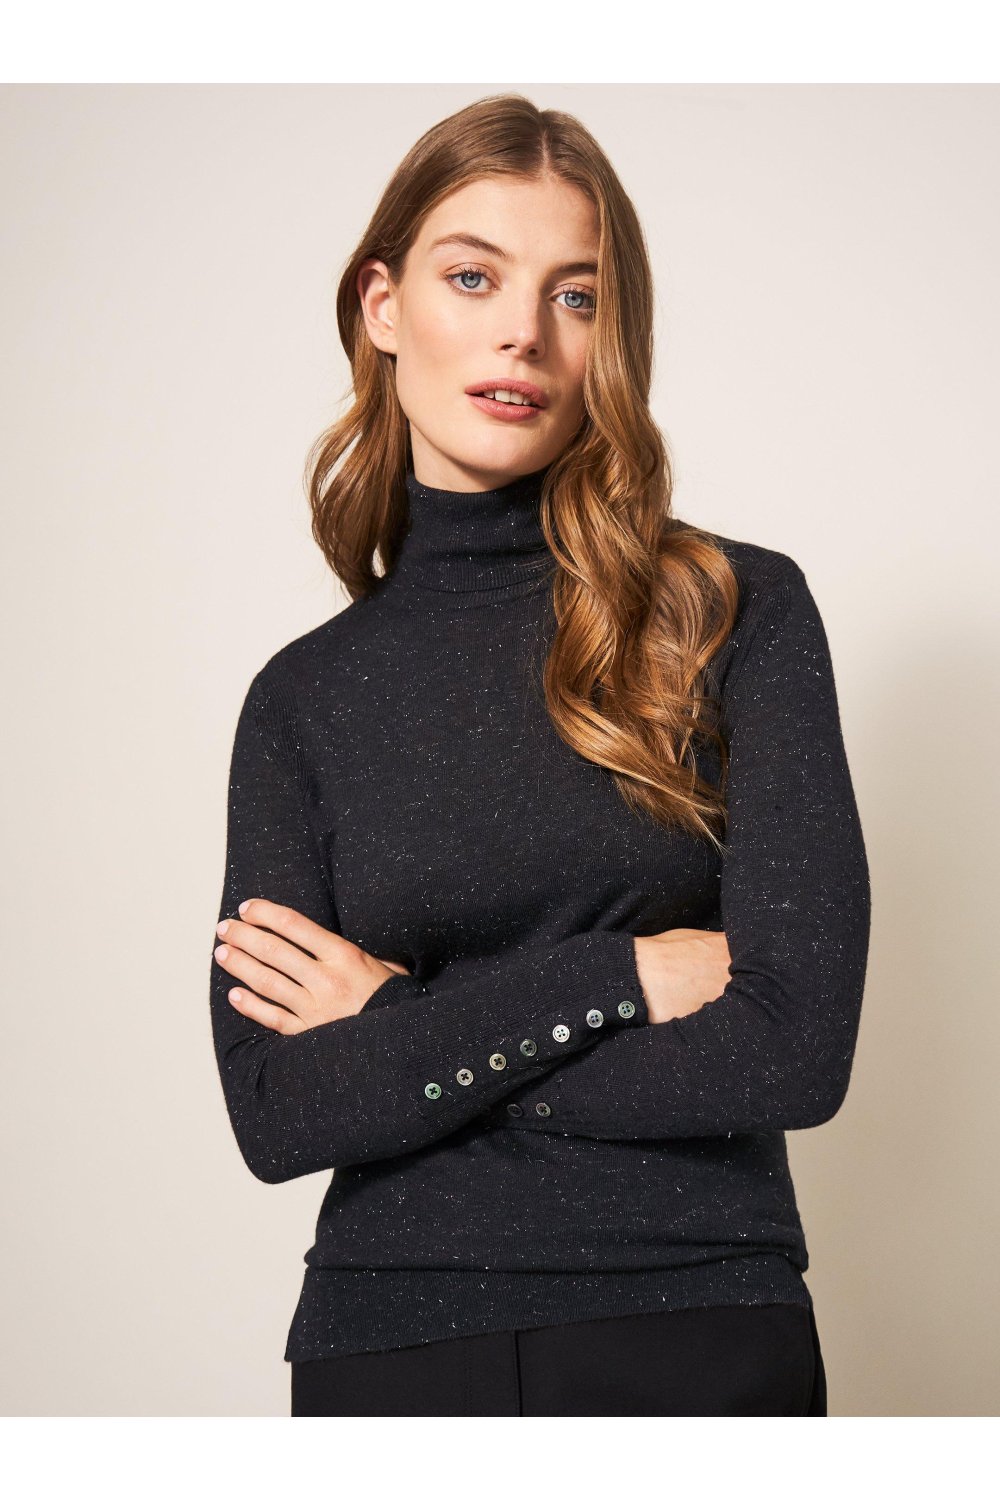 White Stuff SPARKLE ROLL NECK JUMPER 439893 in CHARCOAL GREY